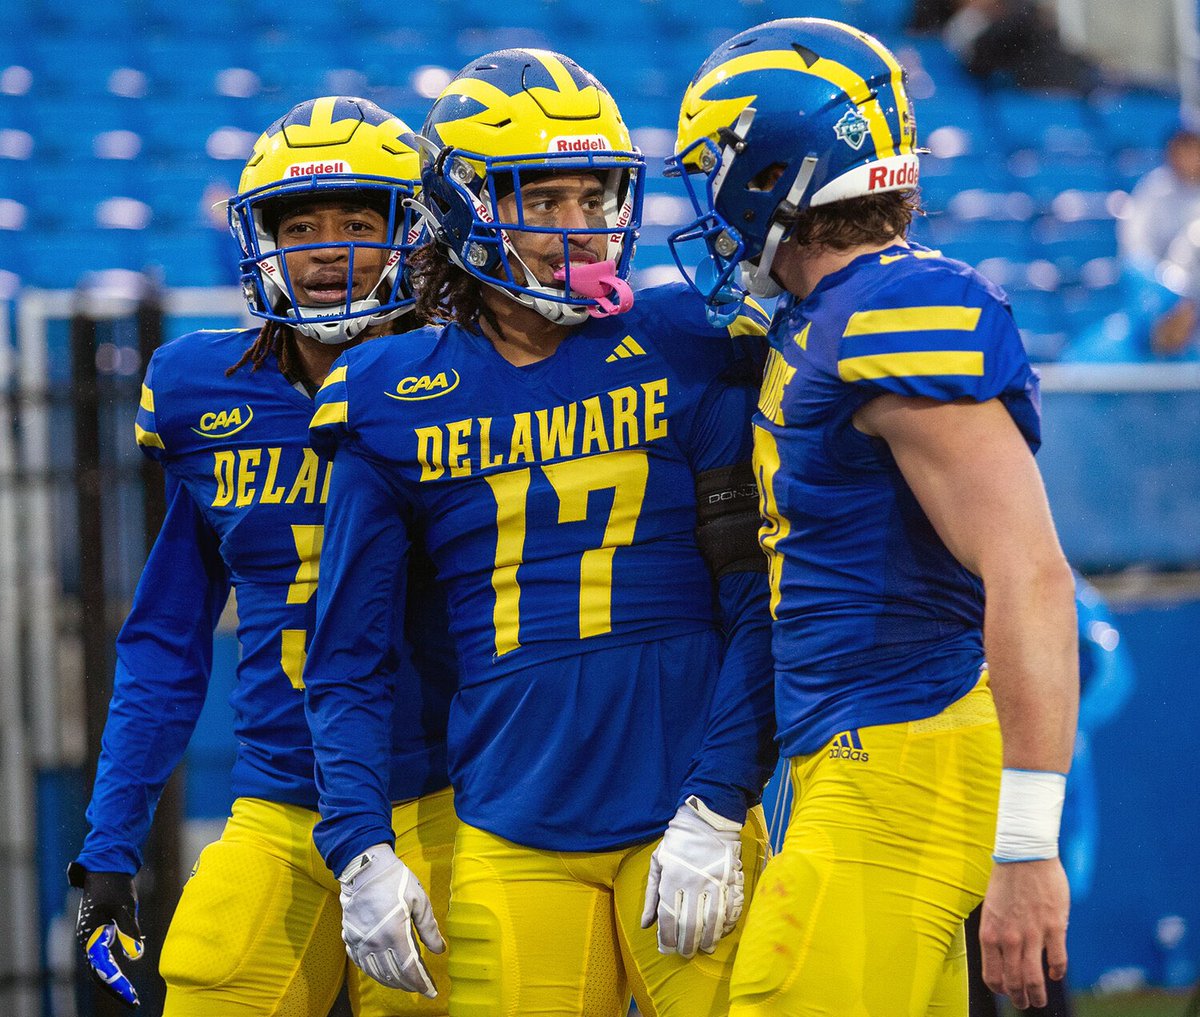 AGTG🙌🏾 Blessed to be offered by Delaware @CoachHawk_k9 @CoachAaronTerry @CoachStrohmeier @SuffernFootball